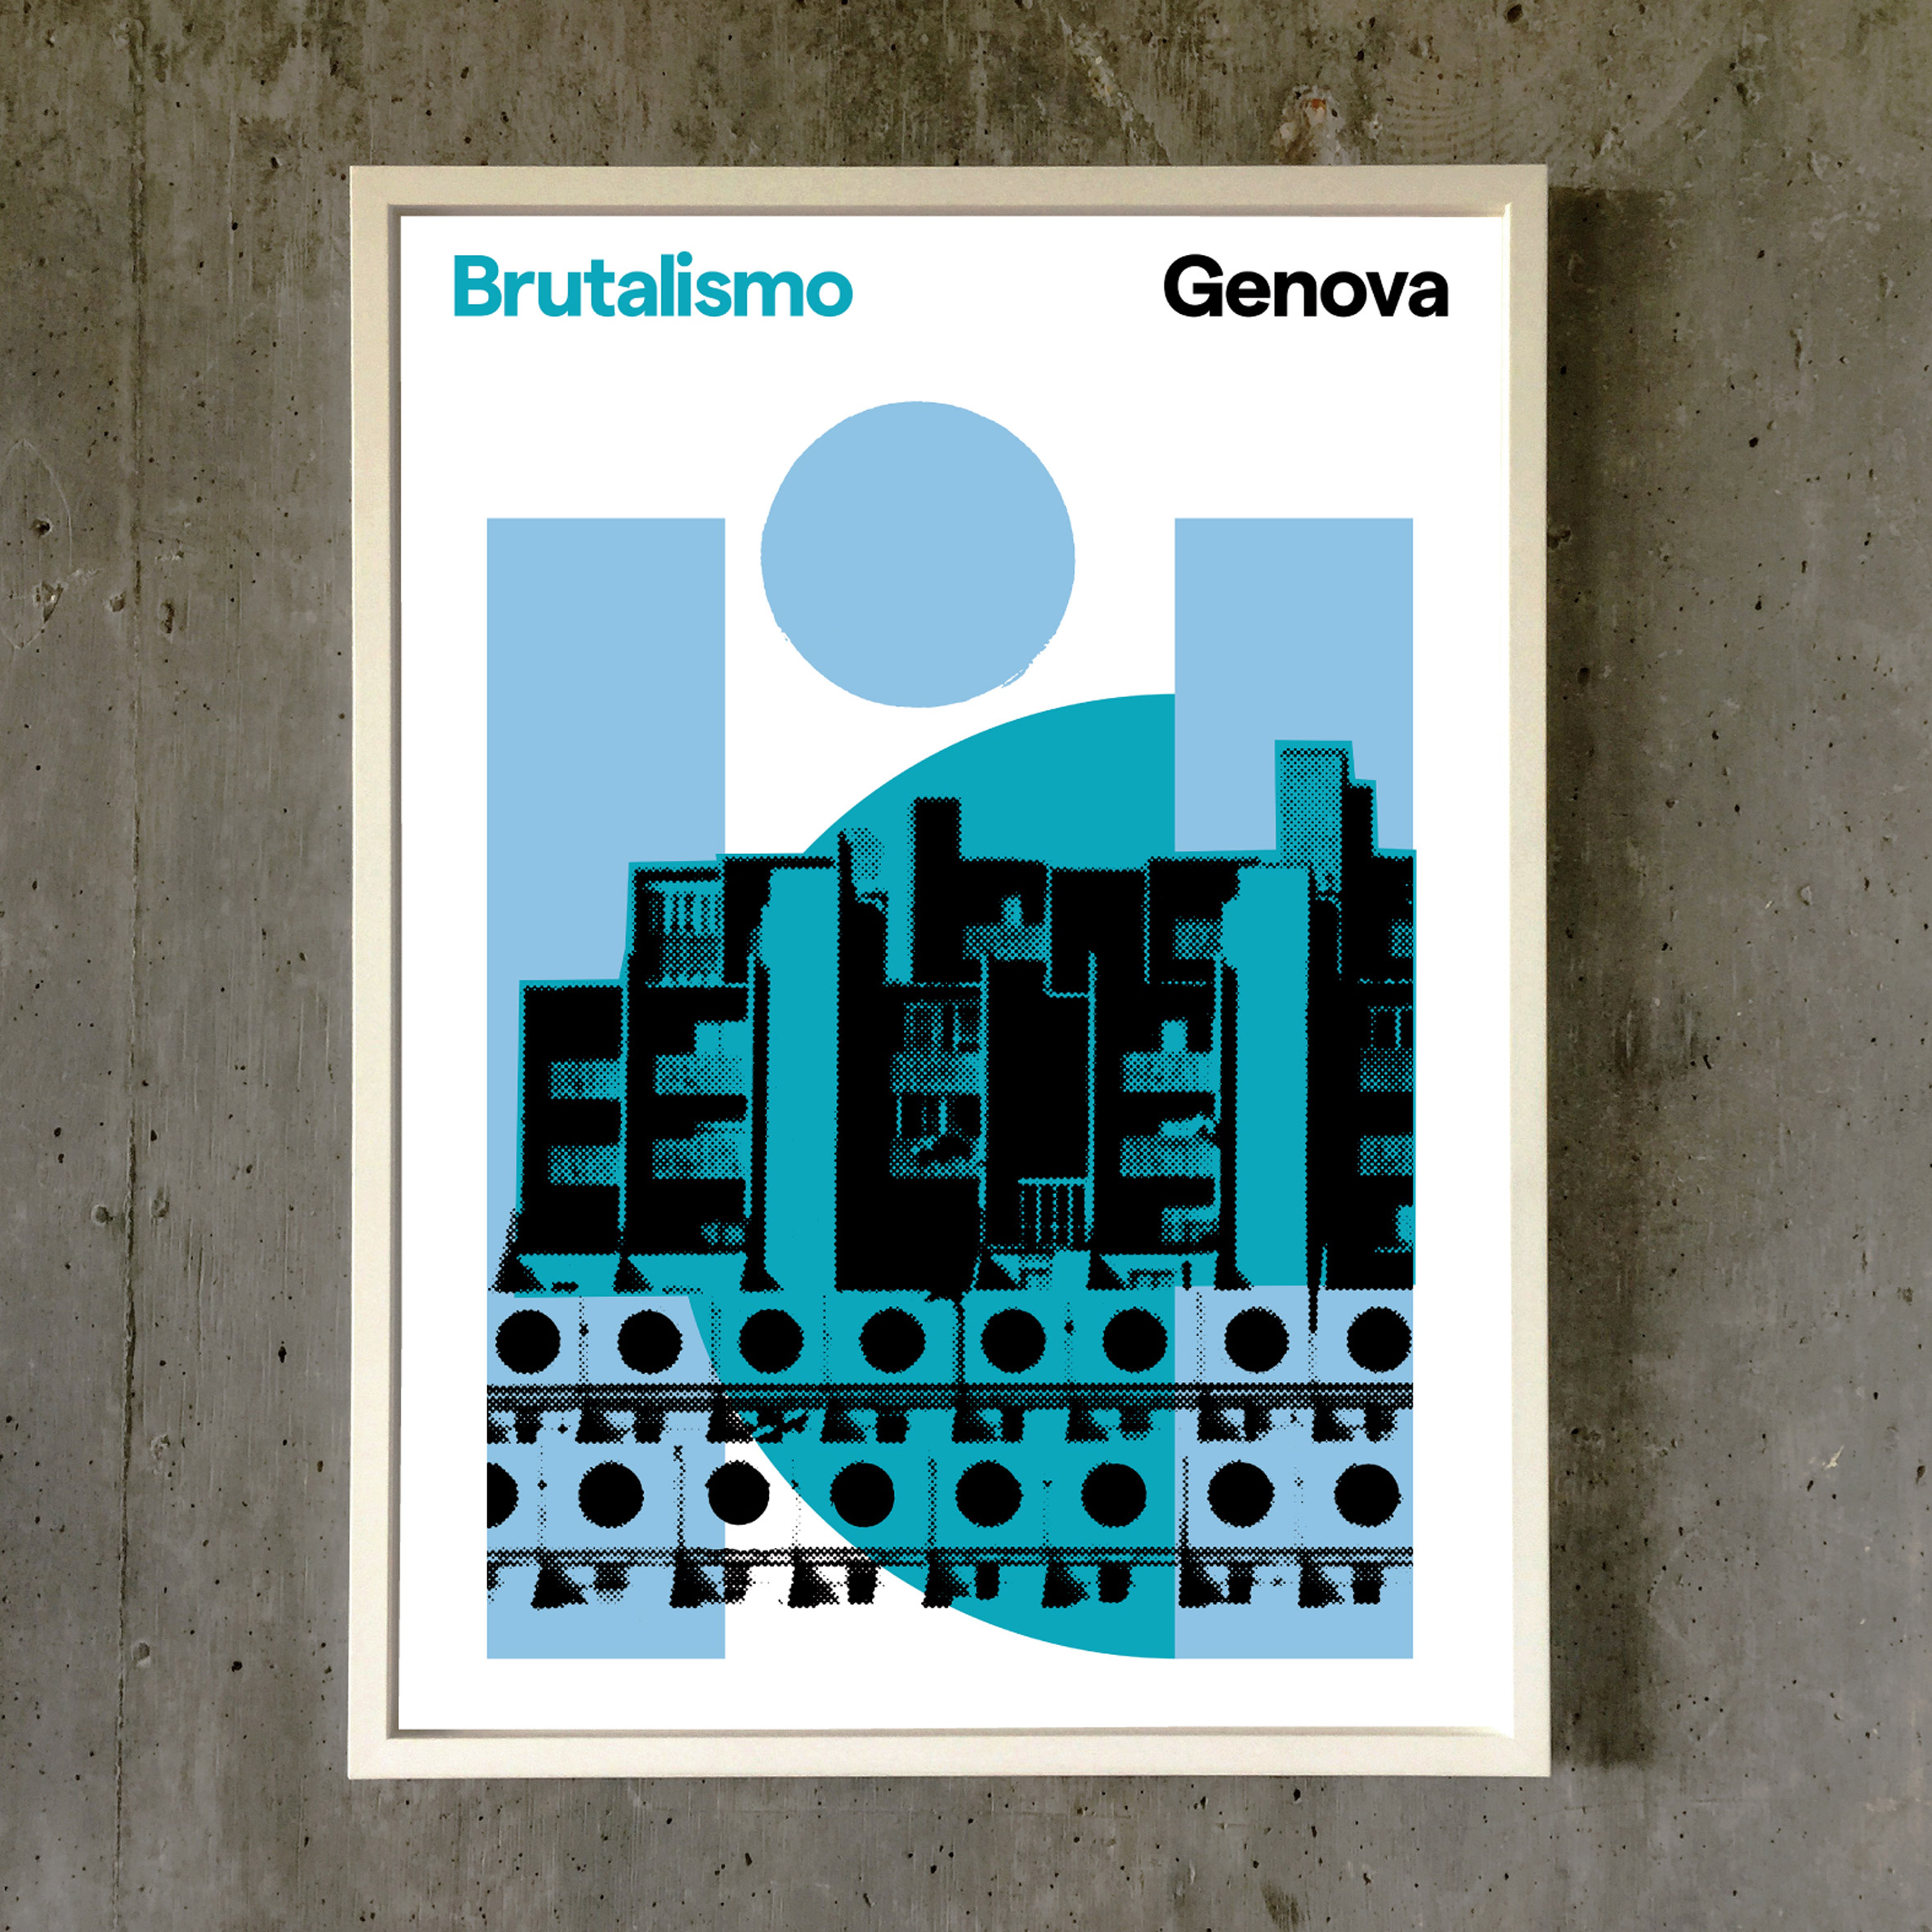 This Brutal House posters competition